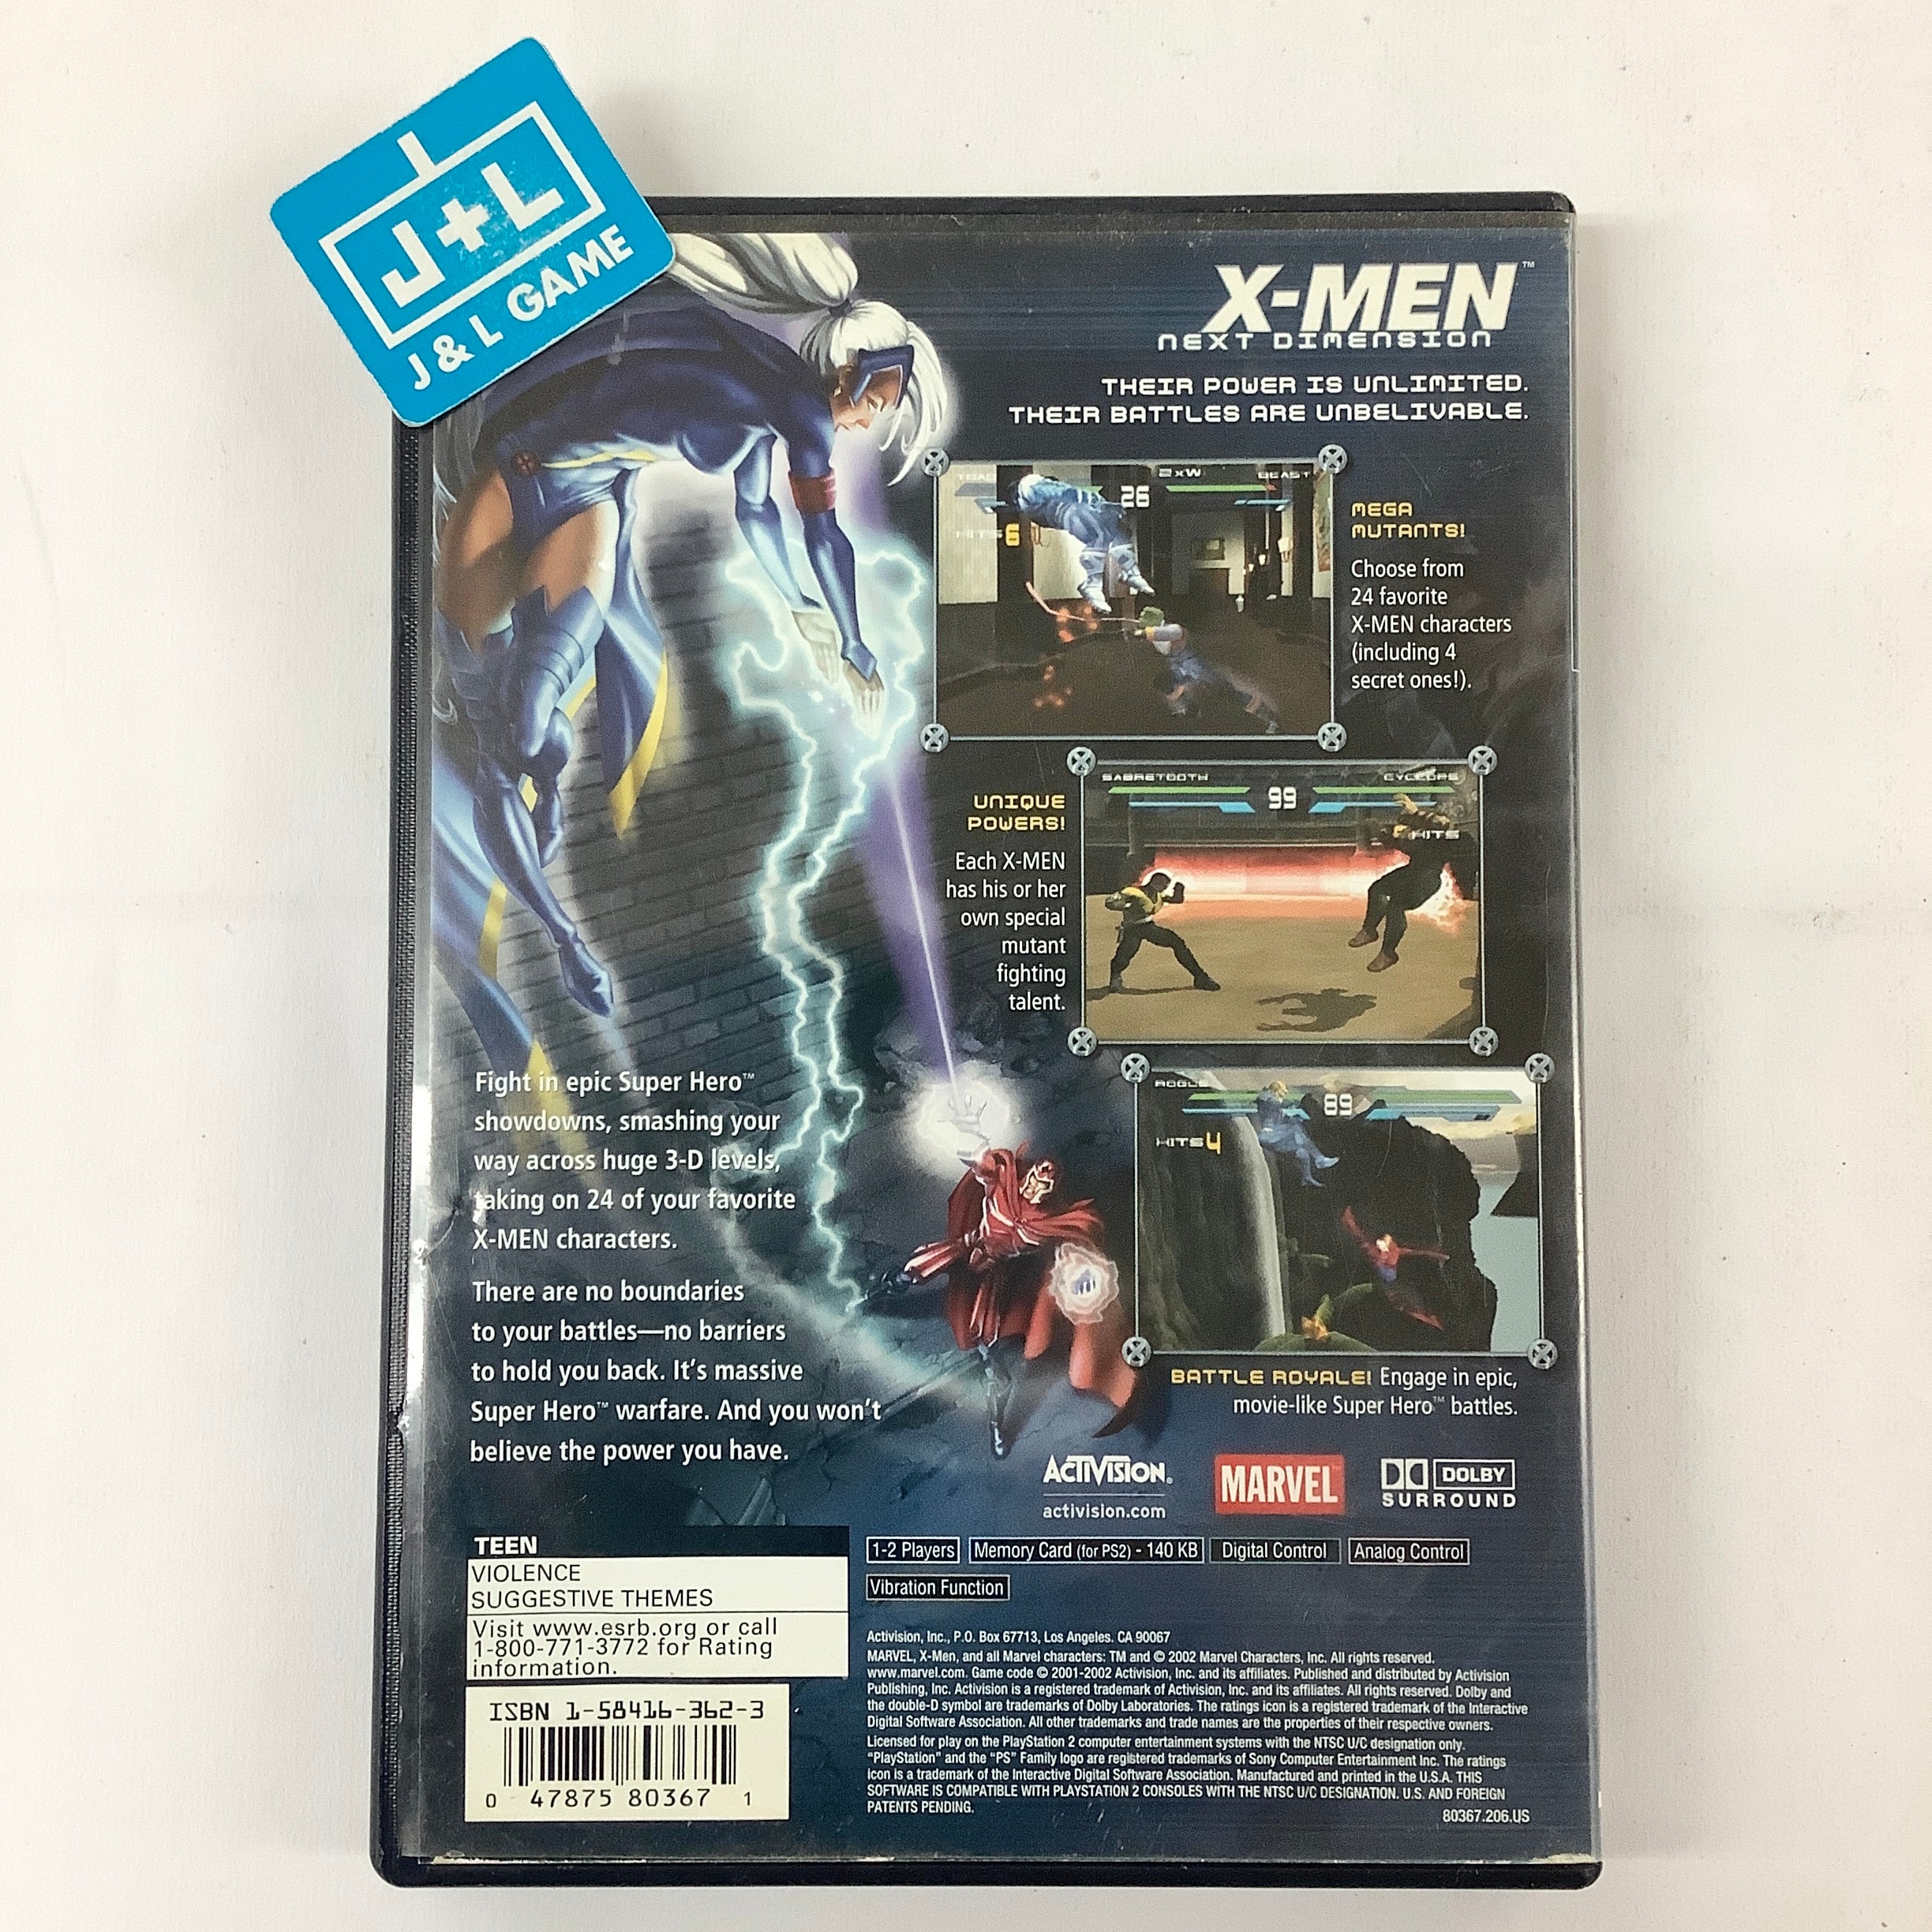 X-Men: Next Dimension - (PS2)  PlayStation 2 [Pre-Owned] Video Games Activision   